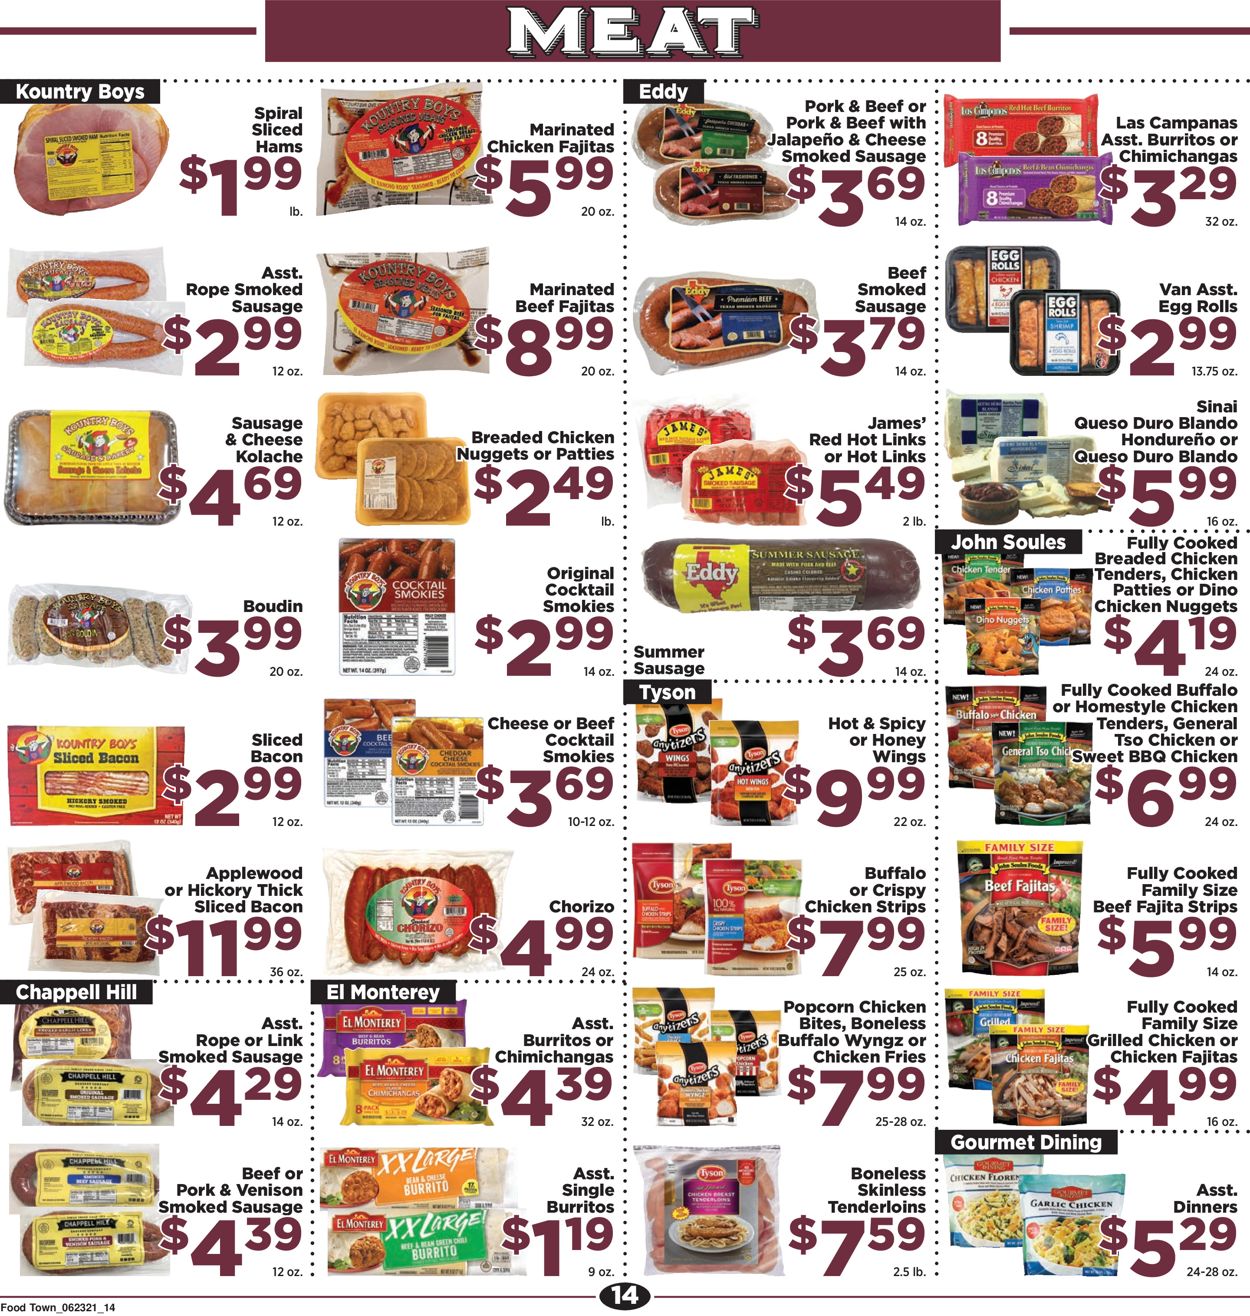 Food Town Ad from 06/23/2021